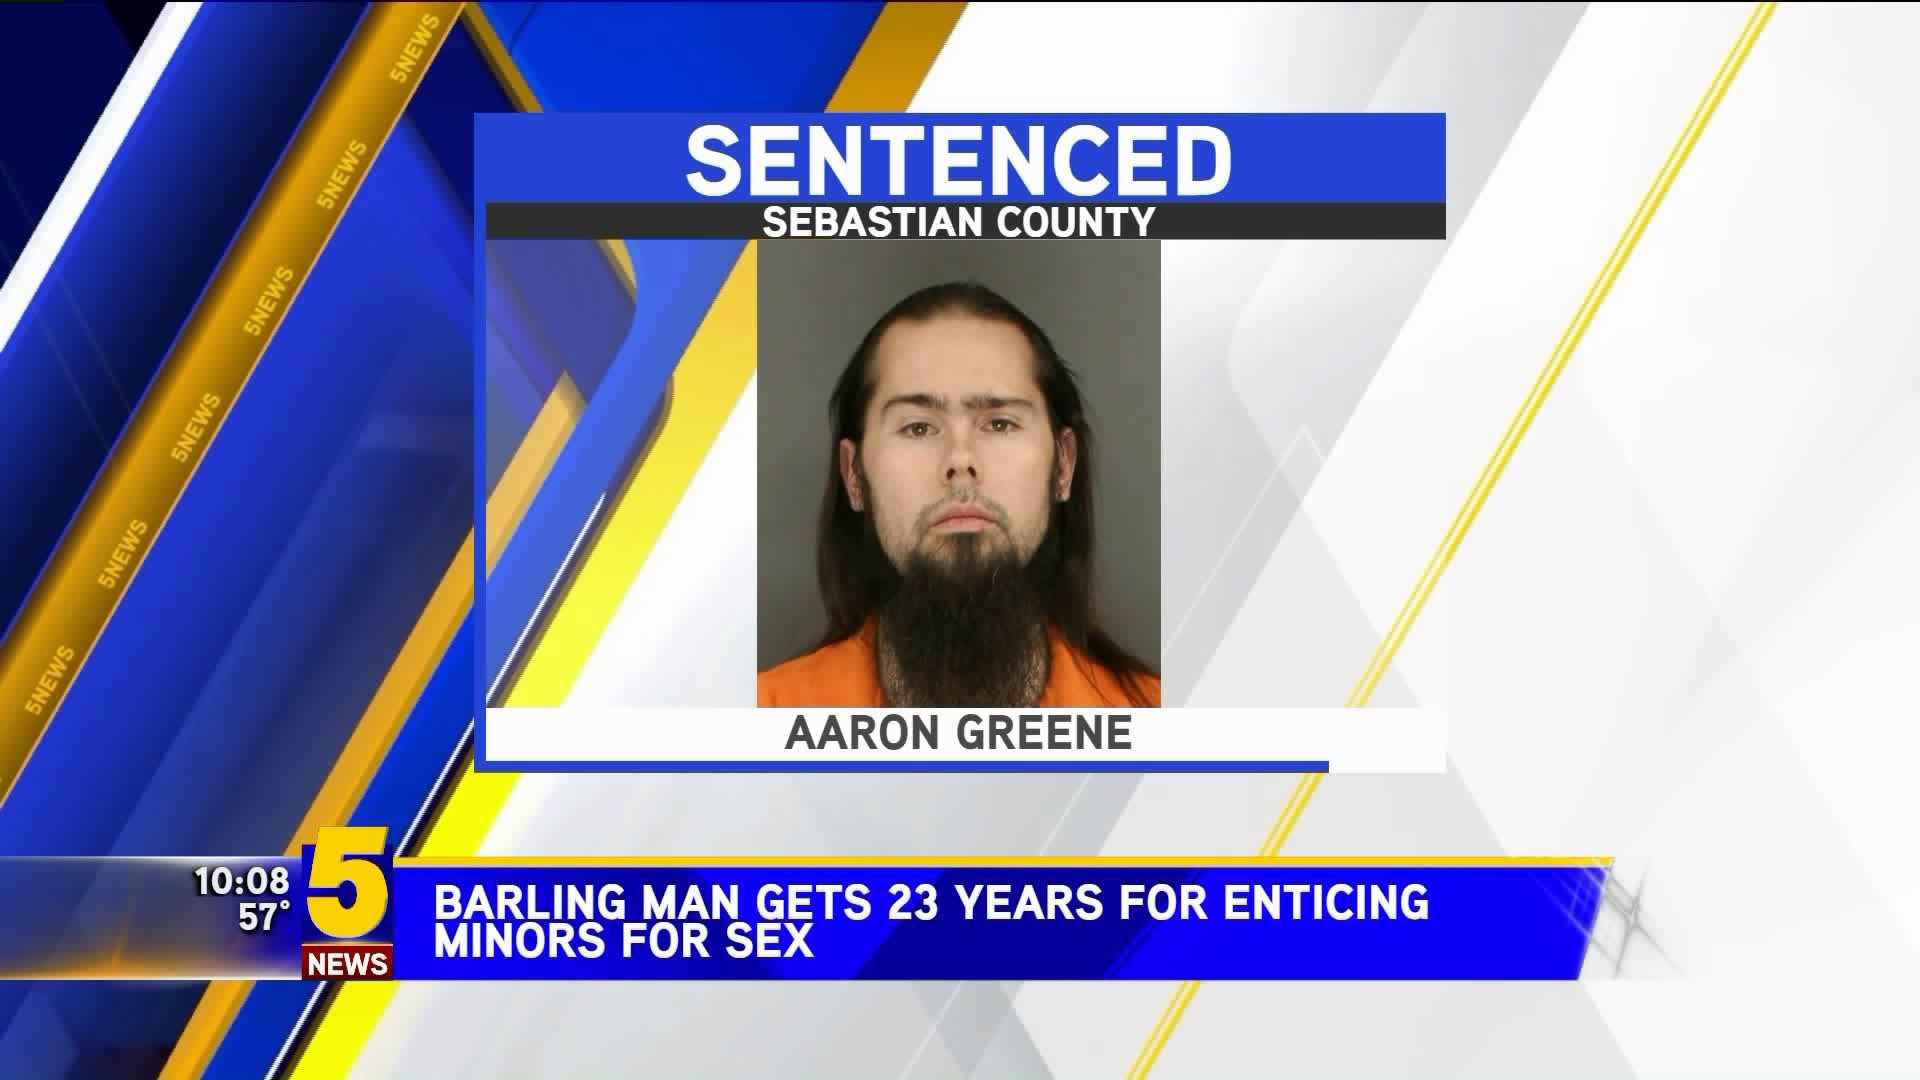 Barling Man Gets 23 Years For Enticing Minors For Sex